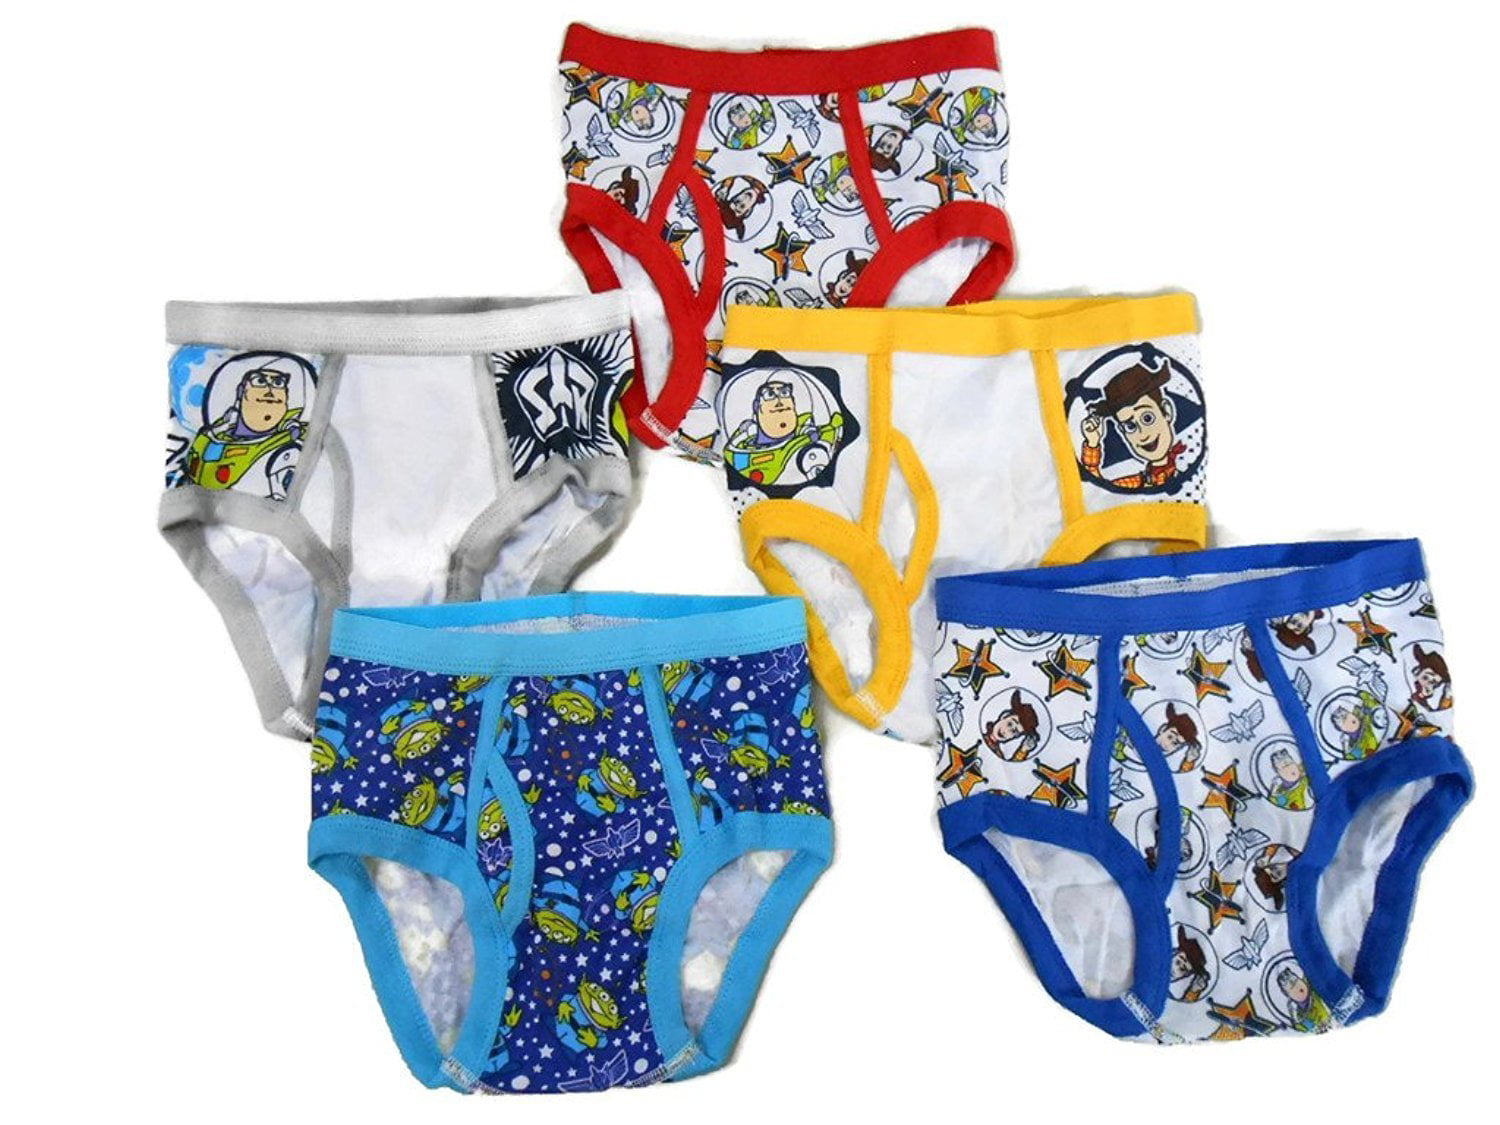 Disney Boys' Toddler Toy Story Brief Multipack Maldives